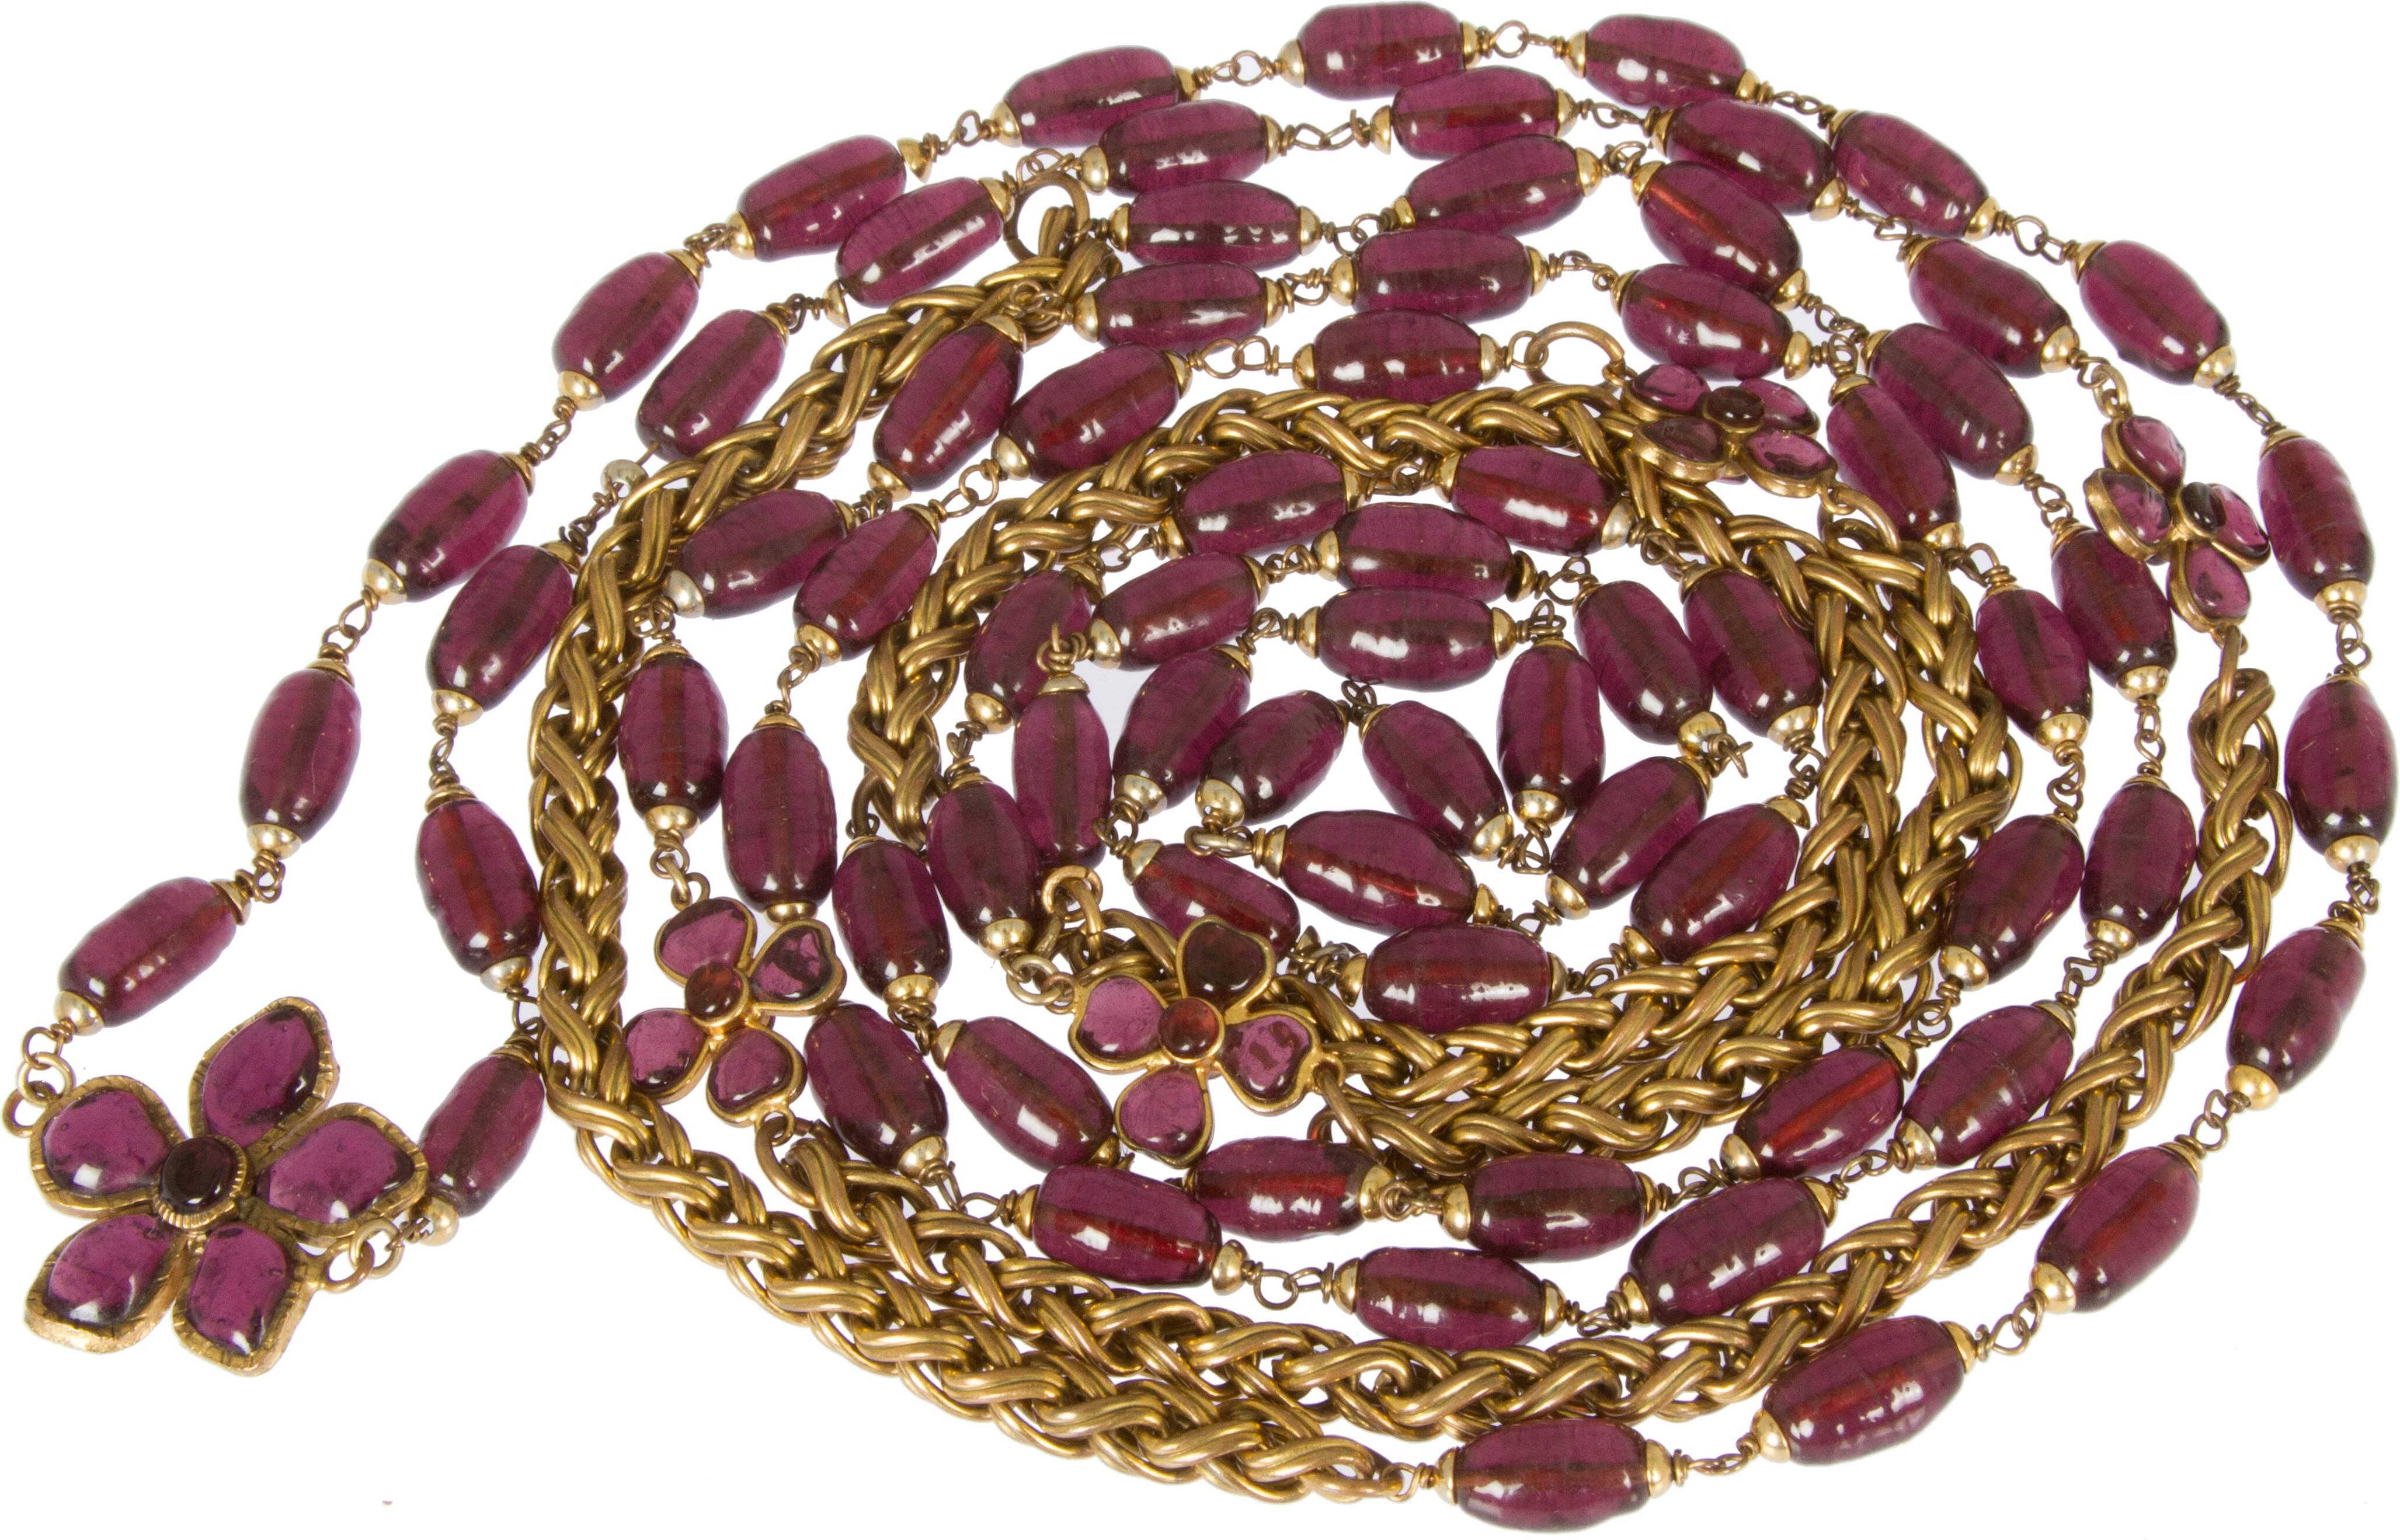 This is a stunning amethyst colored gripoix necklace.  The long length makes this a very versatile piece as it can be worn in many ways and it looks great with other CHANEL necklaces as a layering piece.